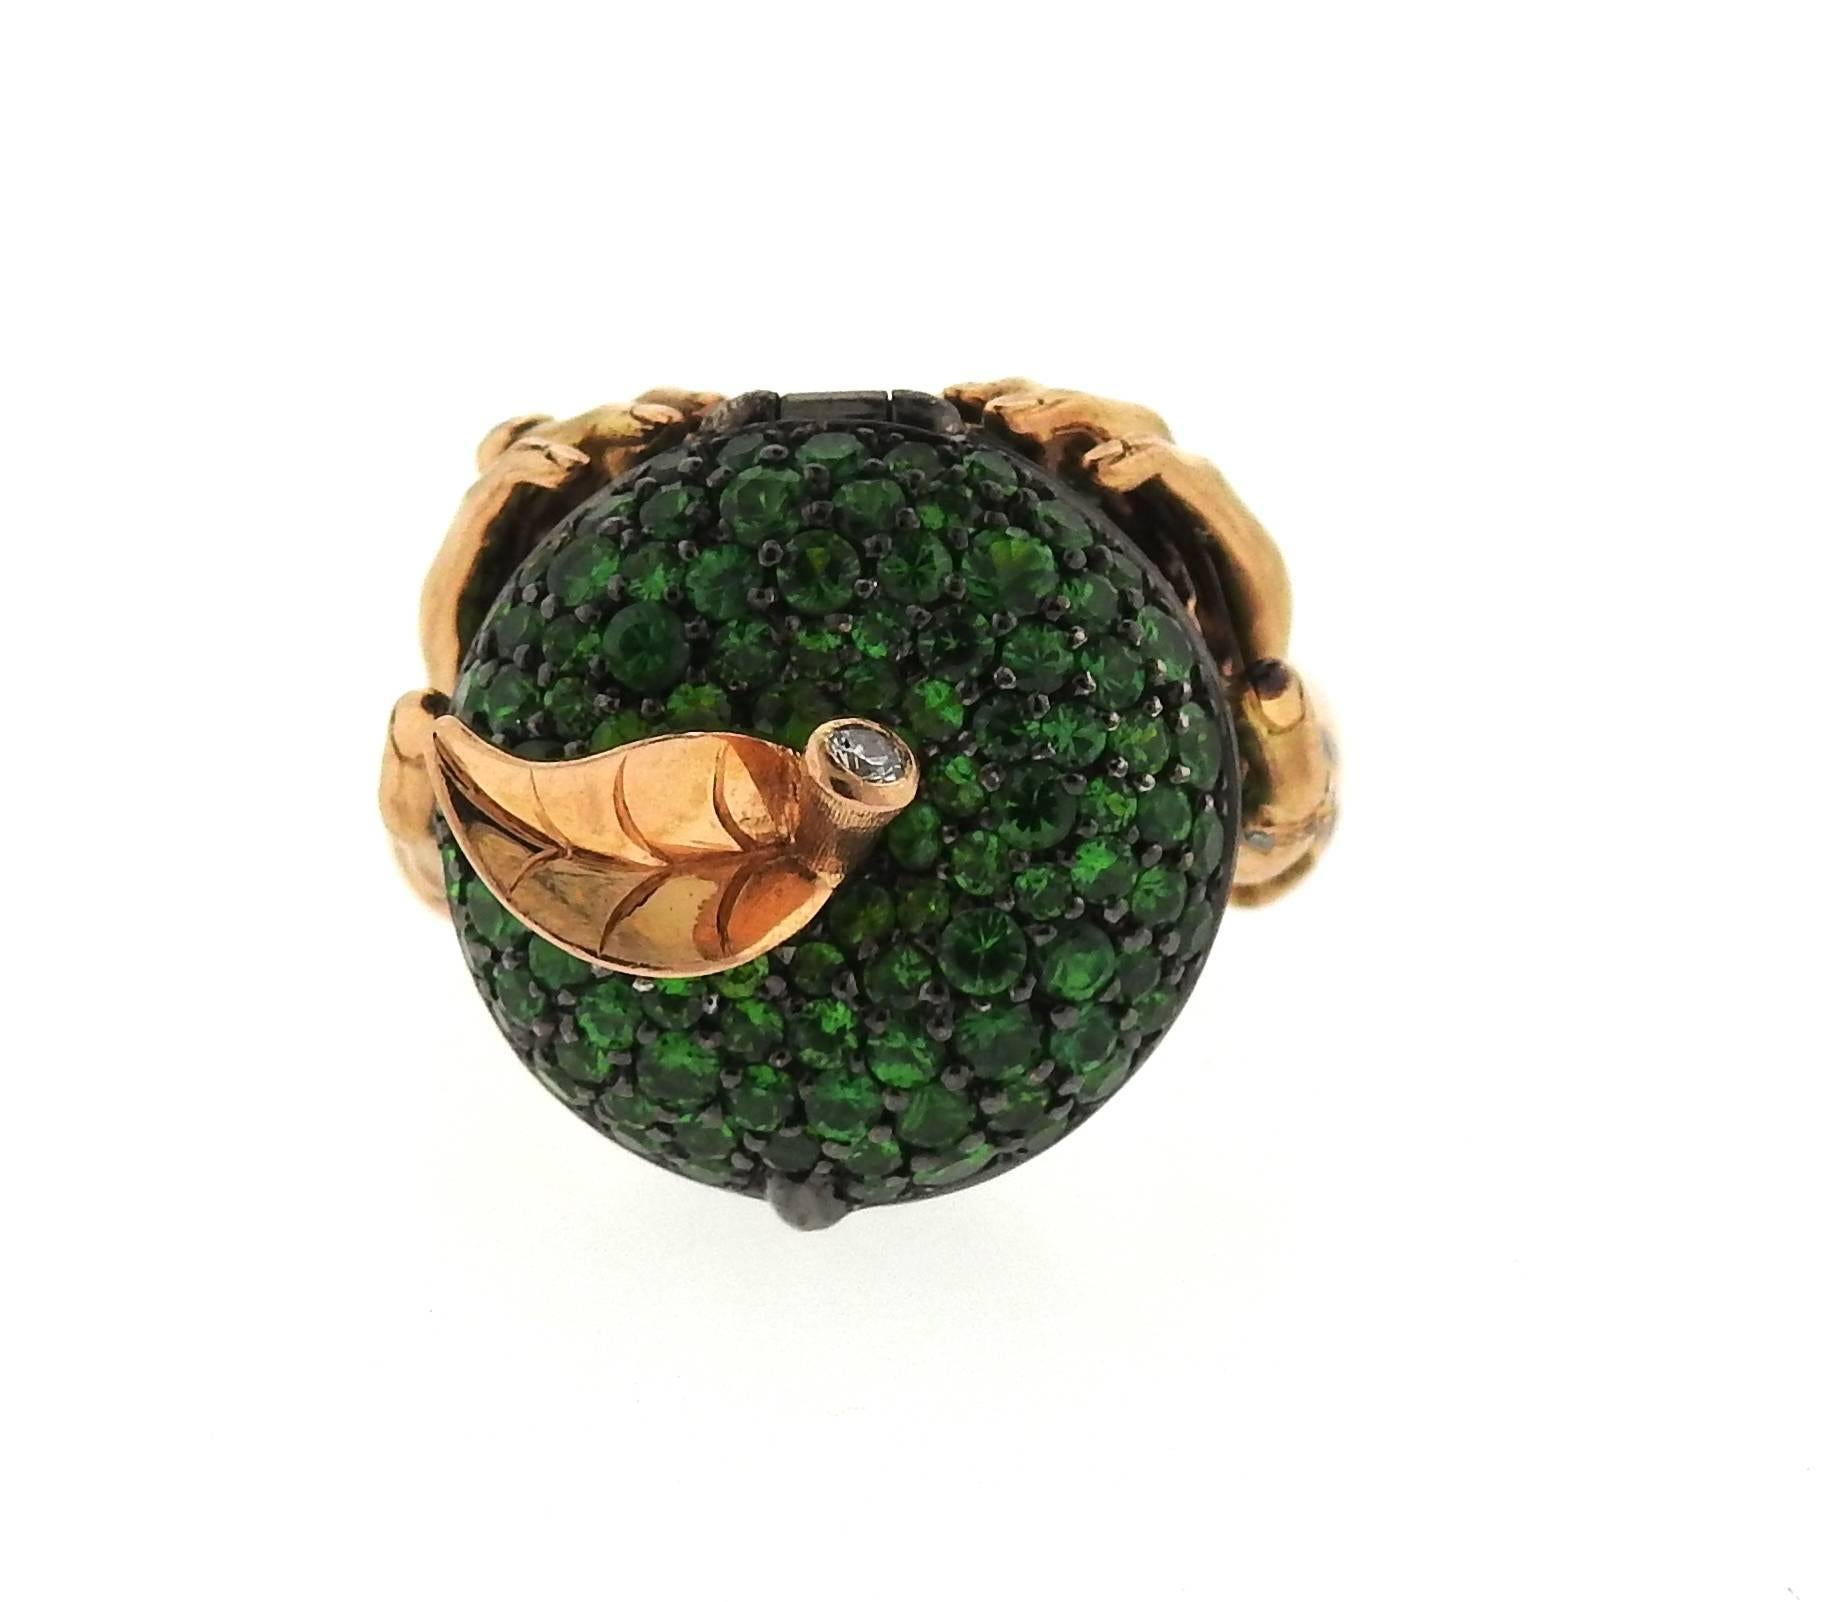 An 18k rose gold poison ring, crafted by Stephen Webster, featuring opening apple, decorated with 3.99ctw in tsavorite garnets and approx. 0.11ctw in diamonds.  Ring size - 6, ring top is 20mm x 21mm, sits approx. 20mm from the finger. Marked: